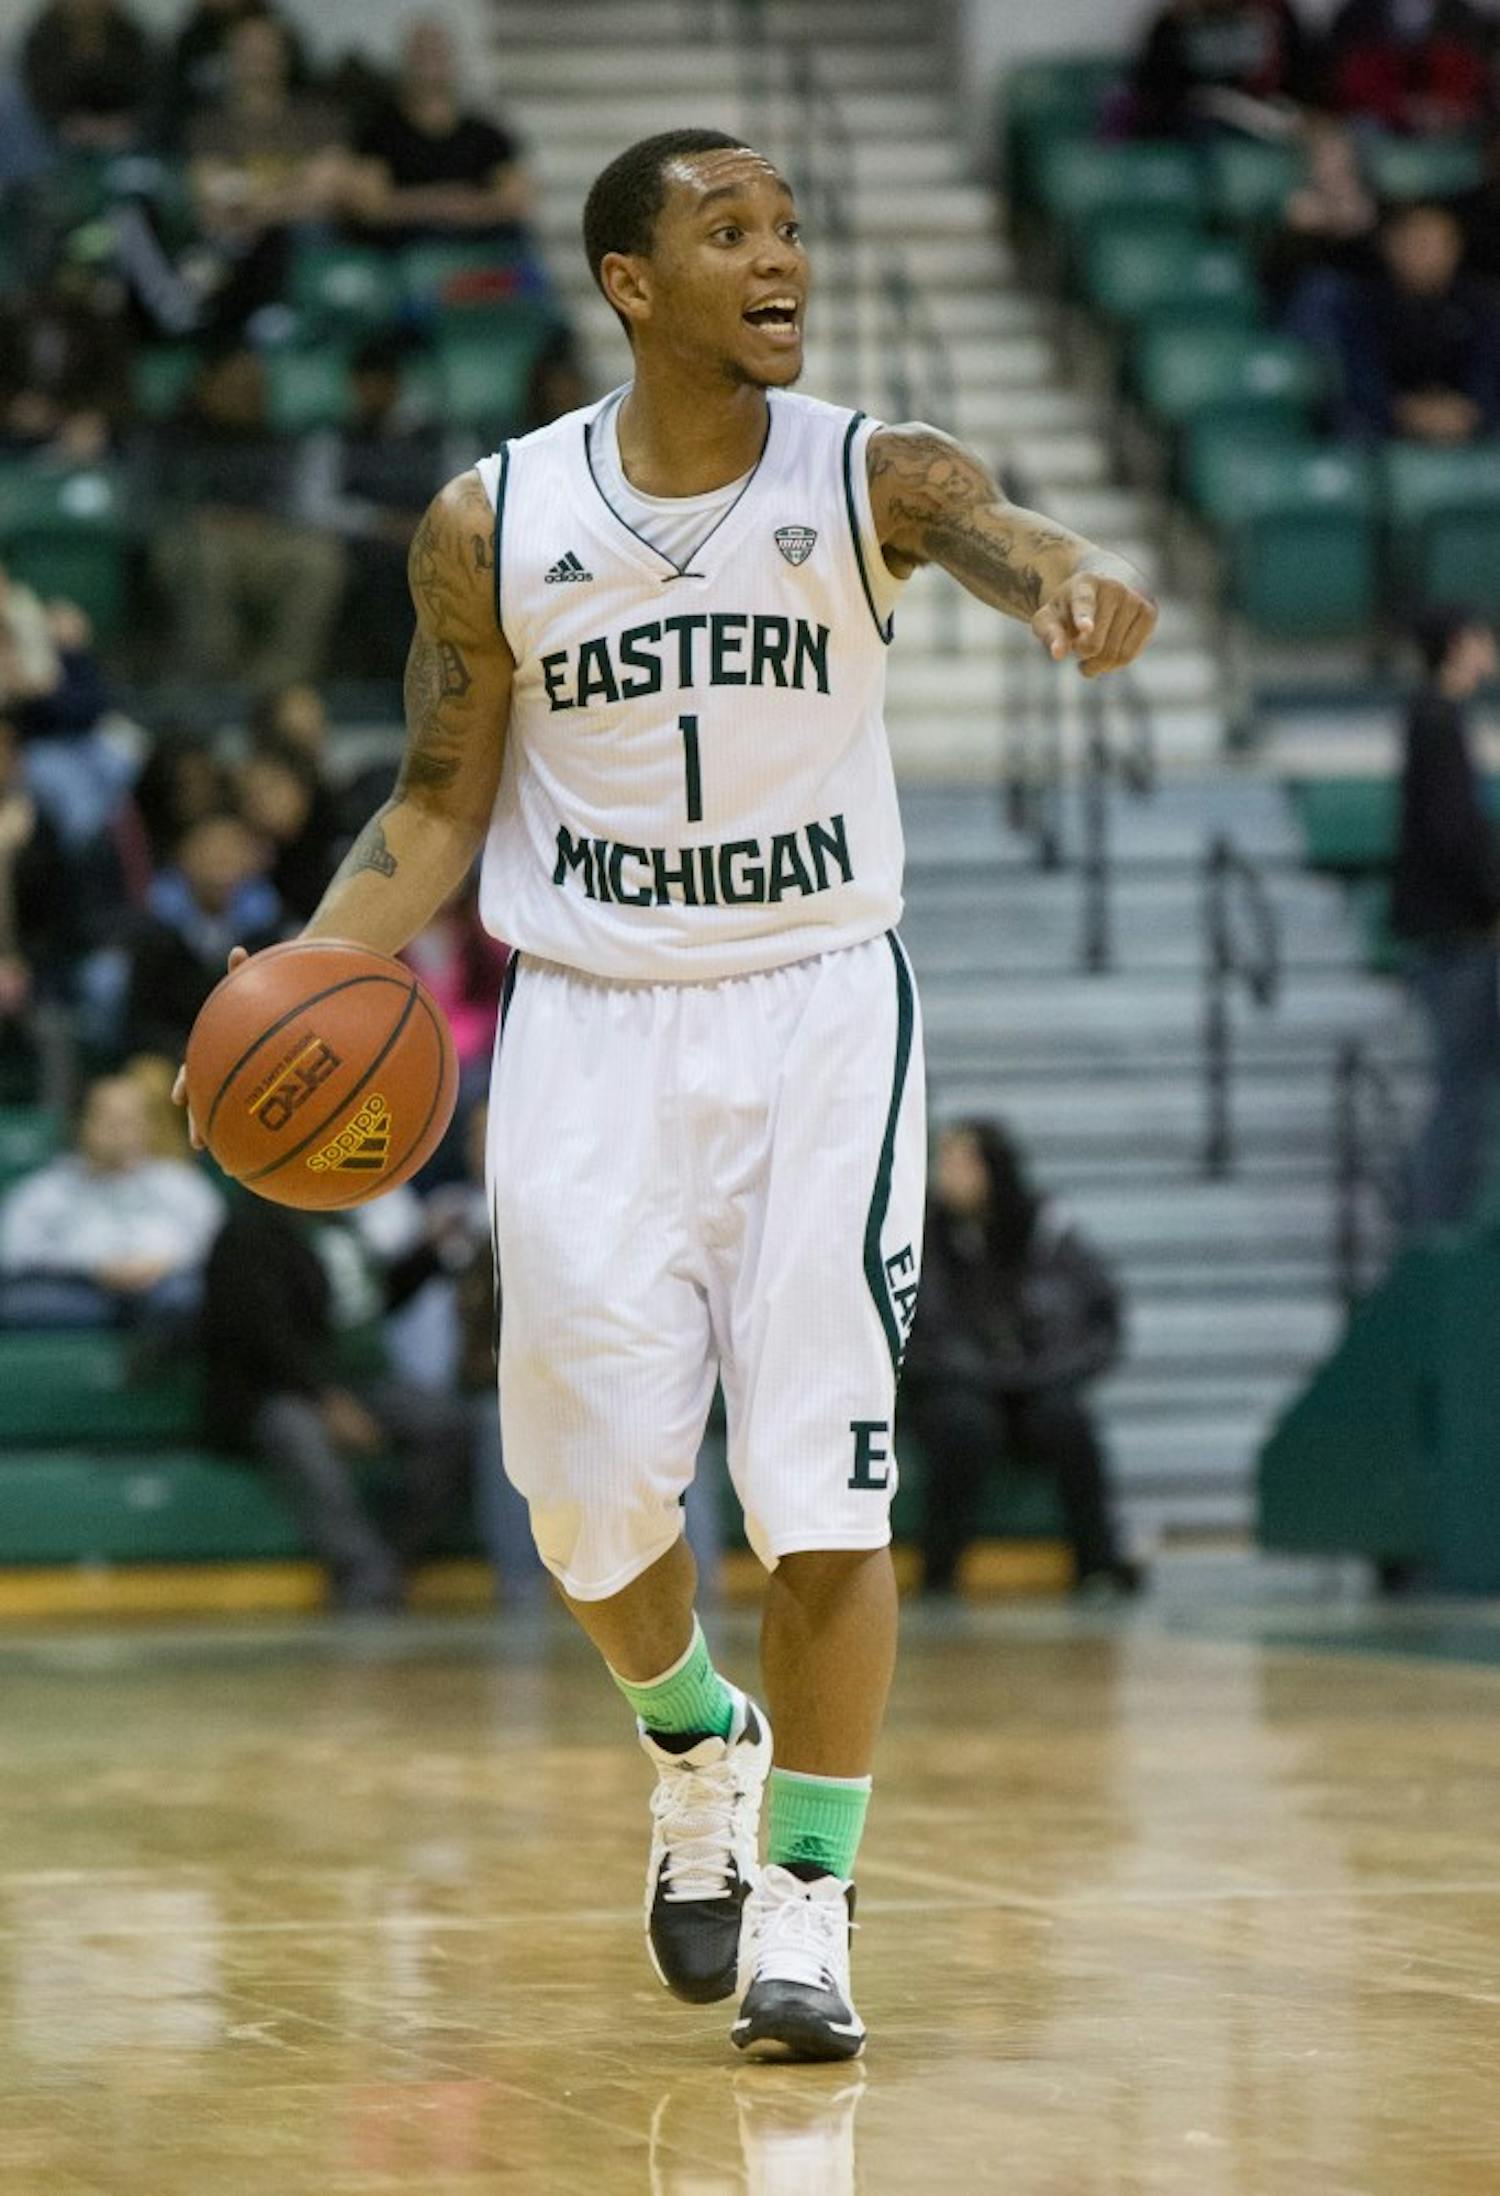 EMU guard Mike Talley (1) sets up the play in Eastern Michigan's 67-58 win over Green Bay Tuesday night. Talley had 11 points and 4 assists.